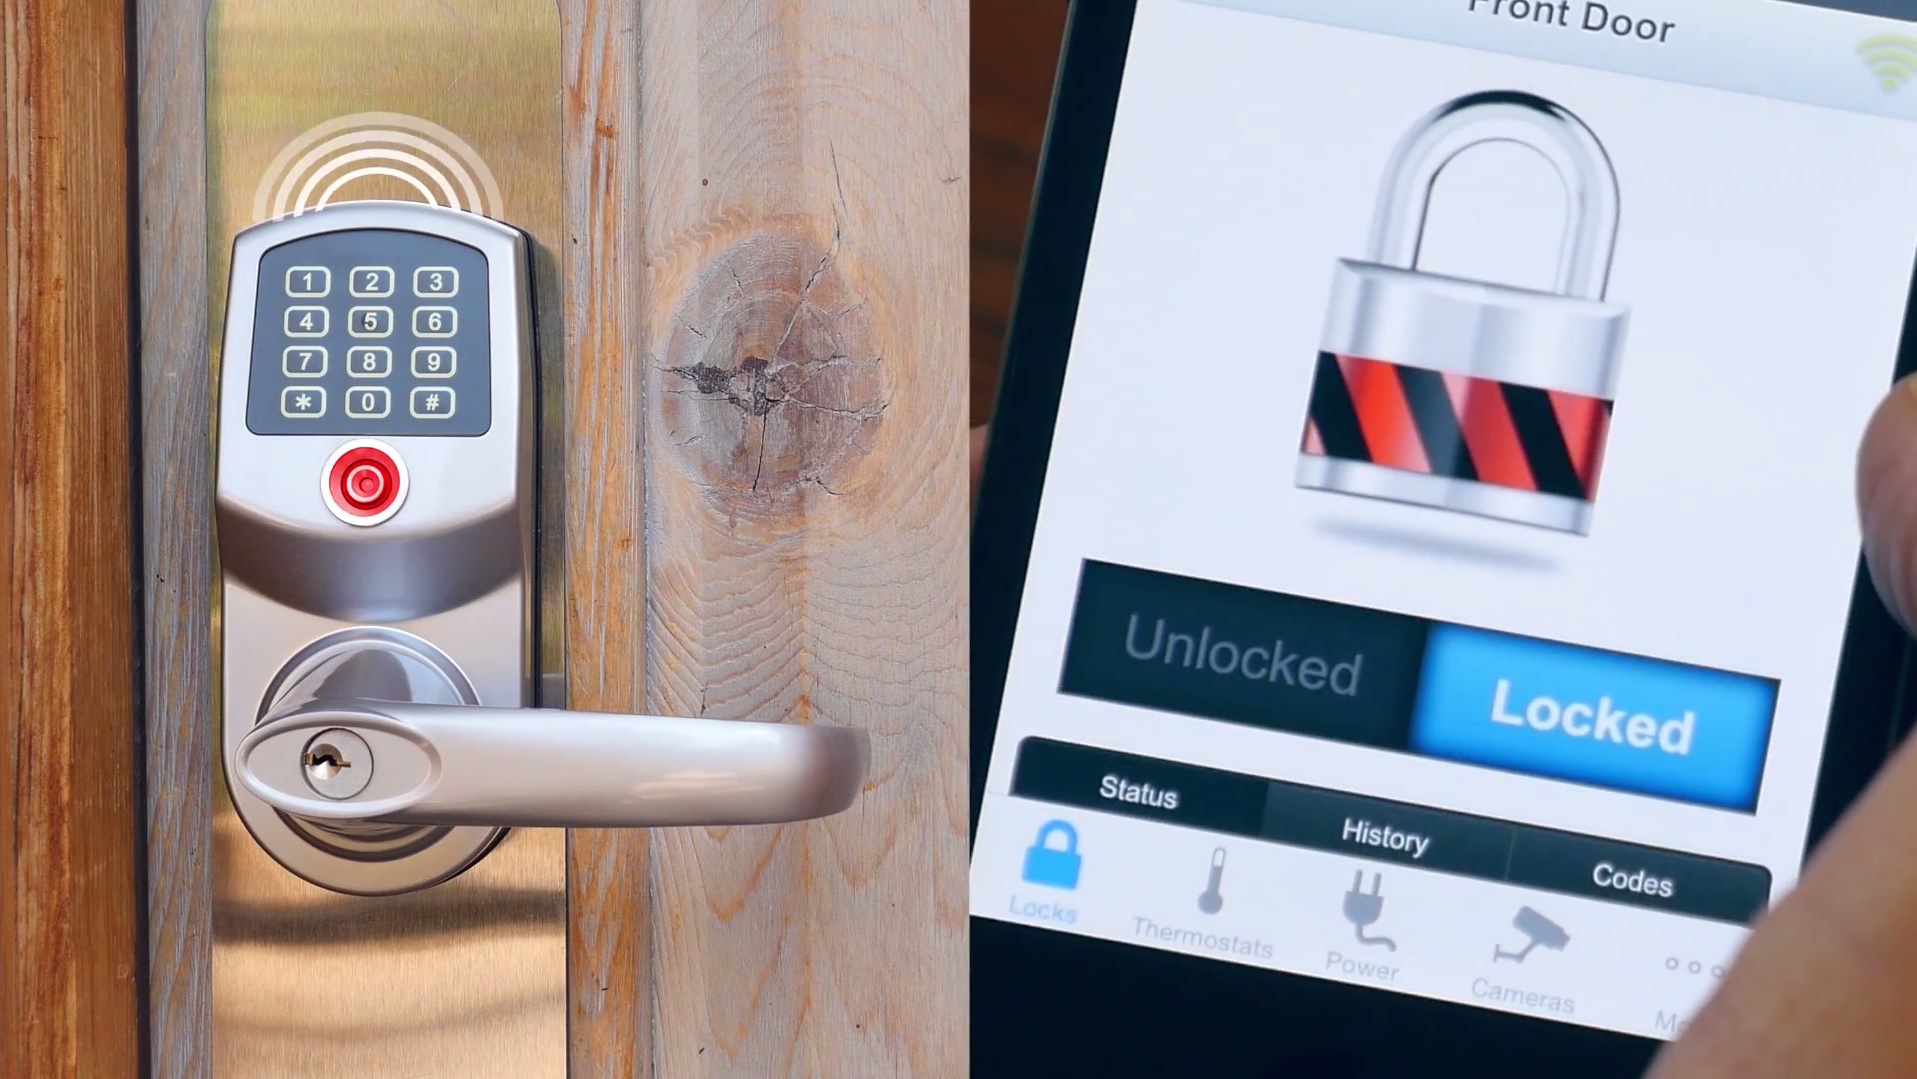 The announcement comes on the heels of LockState’s recent partnership with Airbnb to provide access control solutions through its smart locks.